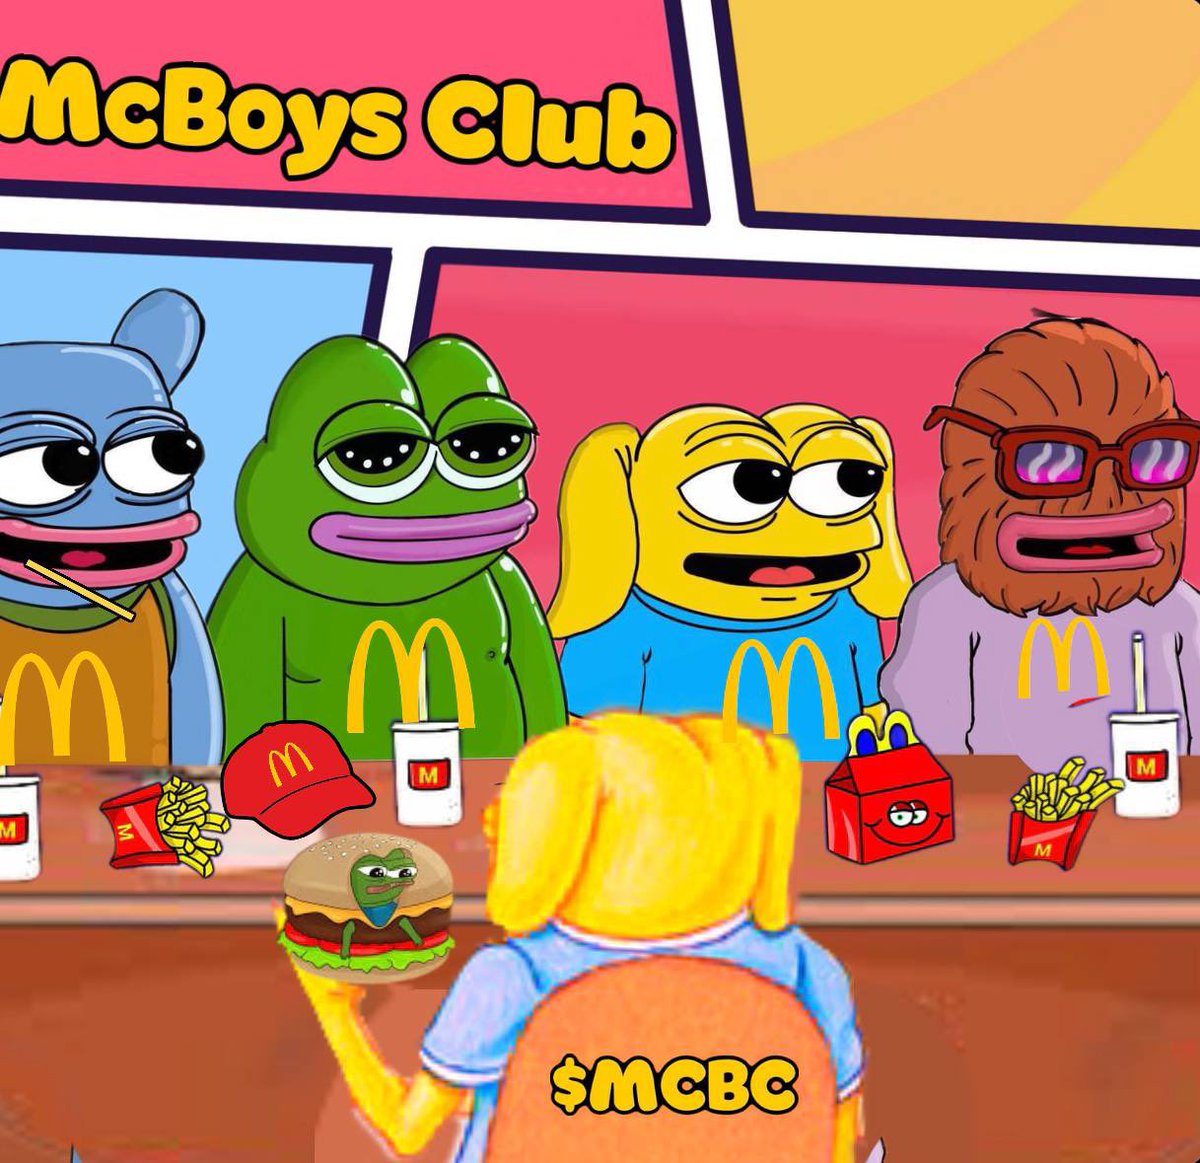 @PumpMasterr Come and check out the #McBoysClub it’s where all the cool kids hangout! $MCBC 

t.me/MCBCeth